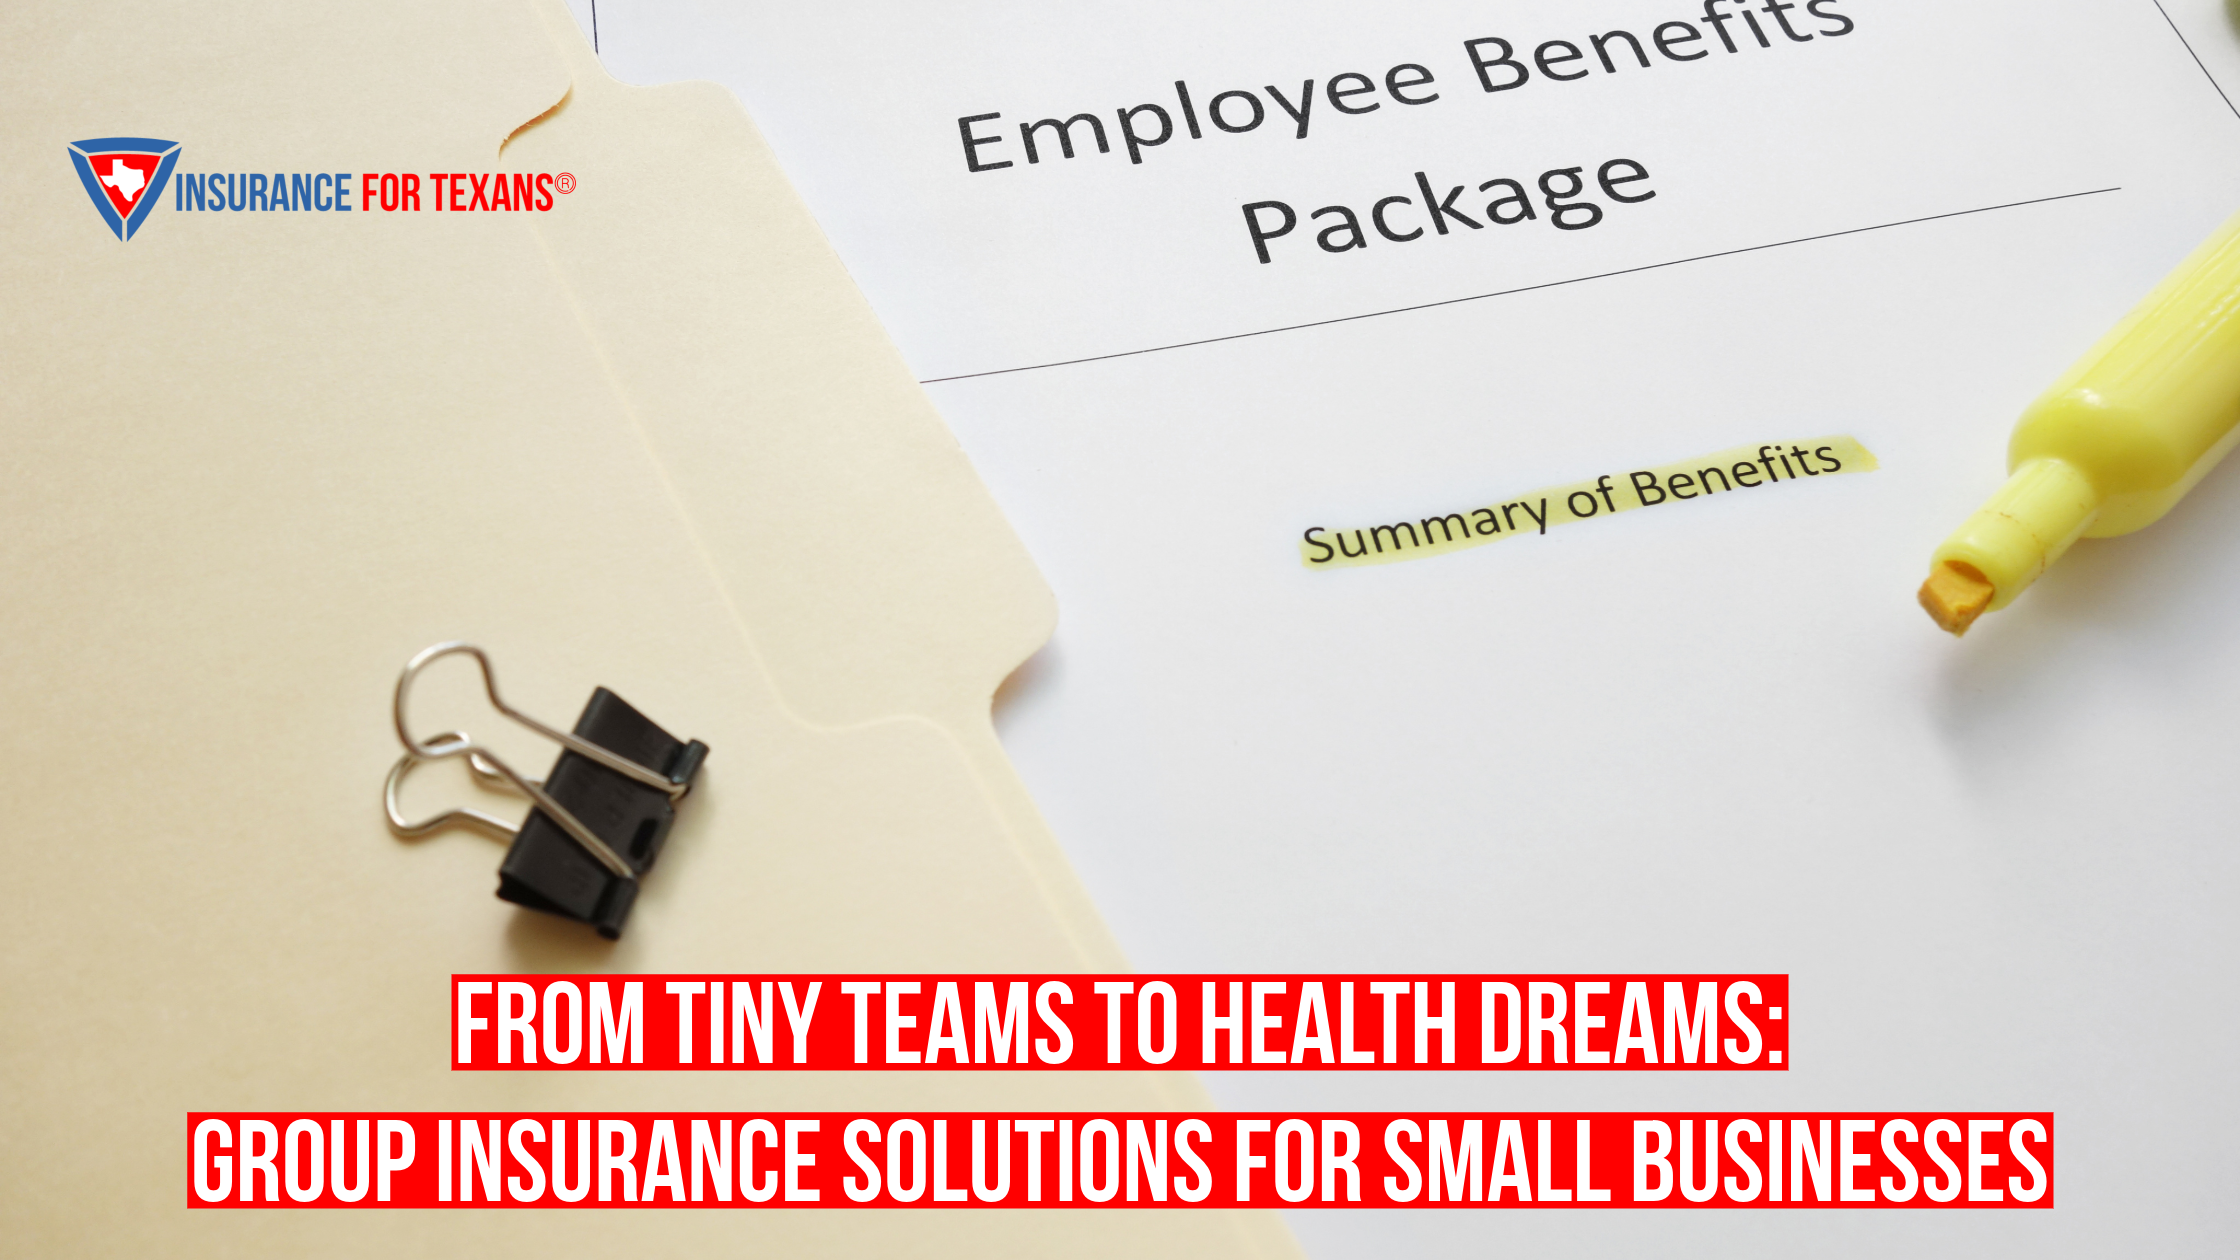 From Tiny Teams to Health Dreams: Group Insurance Solutions for Small Businesses